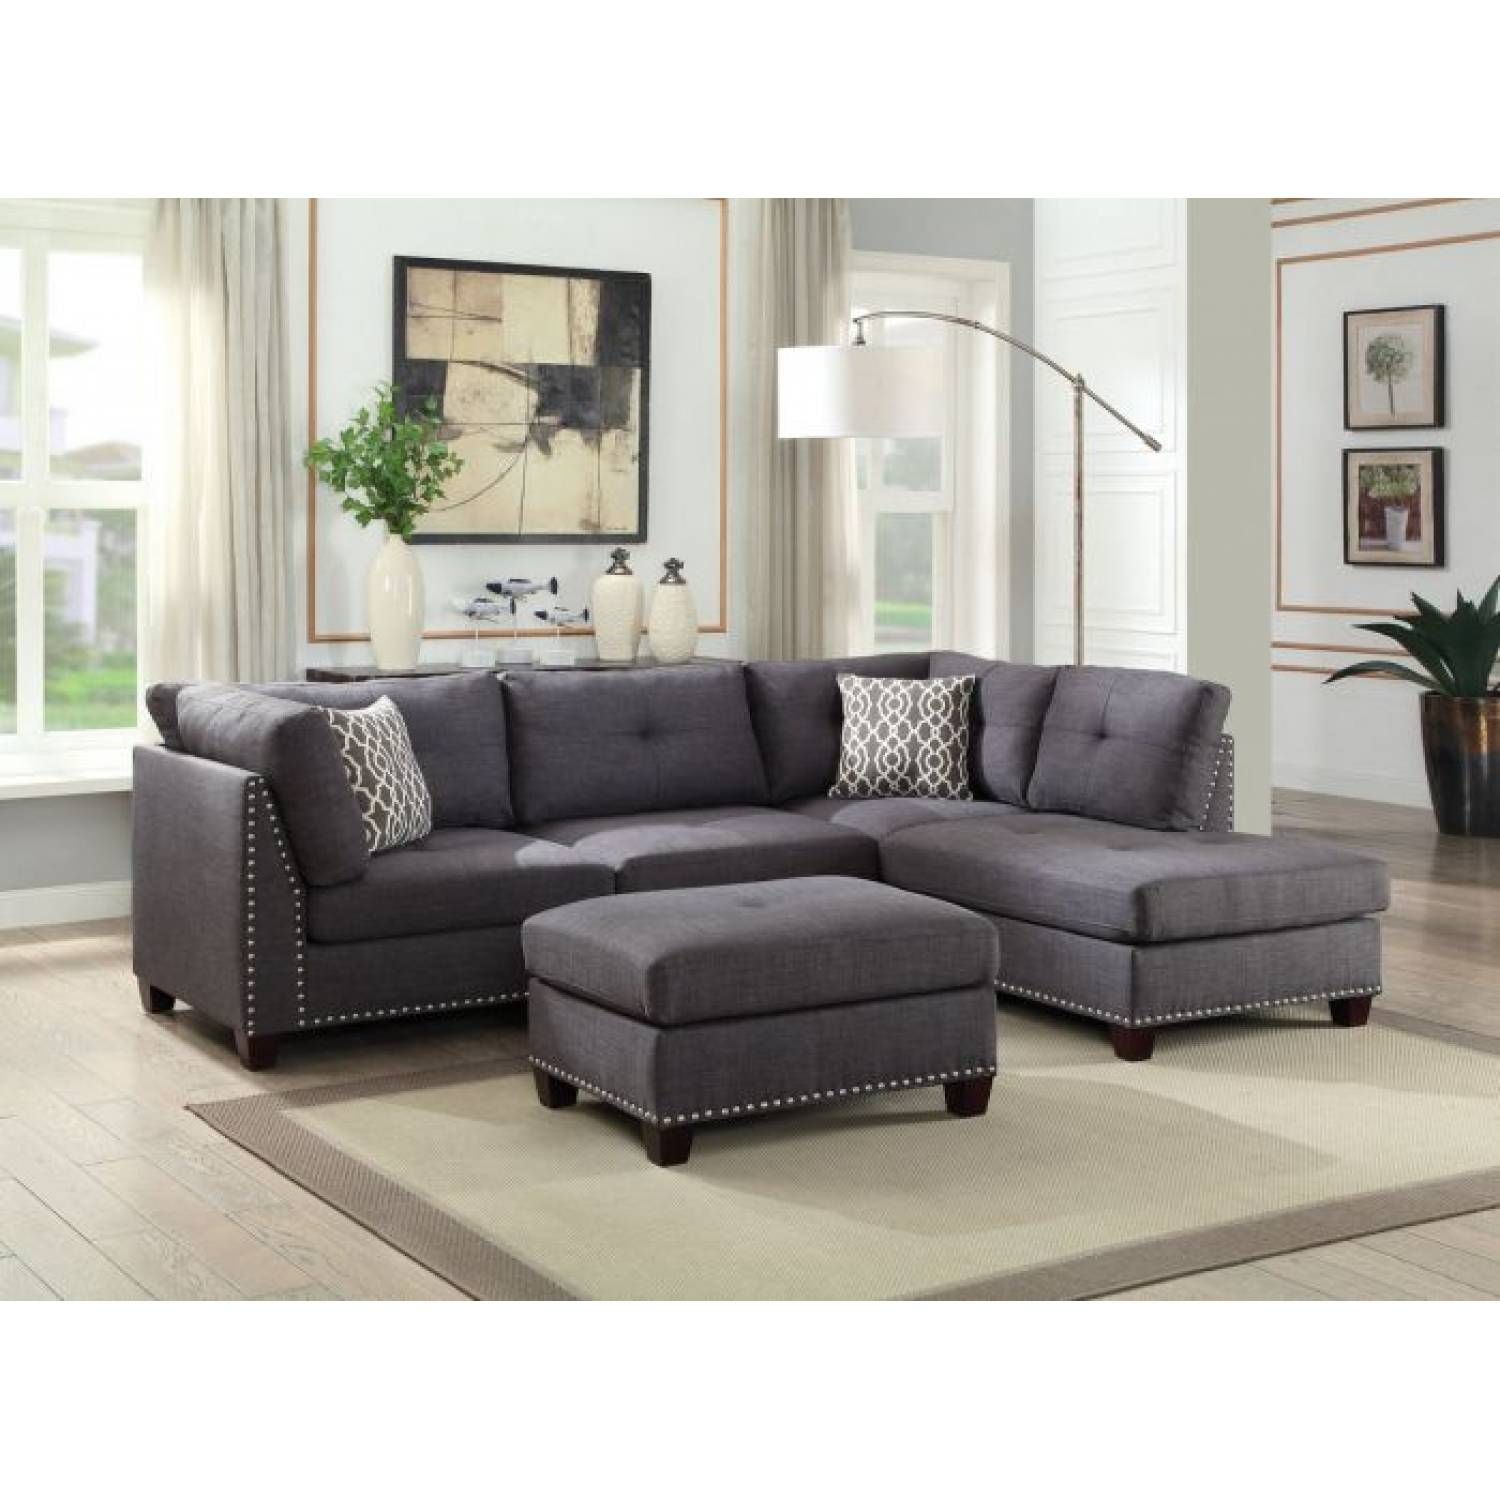 Laurissa Sectional Sofa & Ottoman (2 Pillows) In Light Charcoal Linen Pertaining To Light Charcoal Linen Sofas (View 14 of 15)